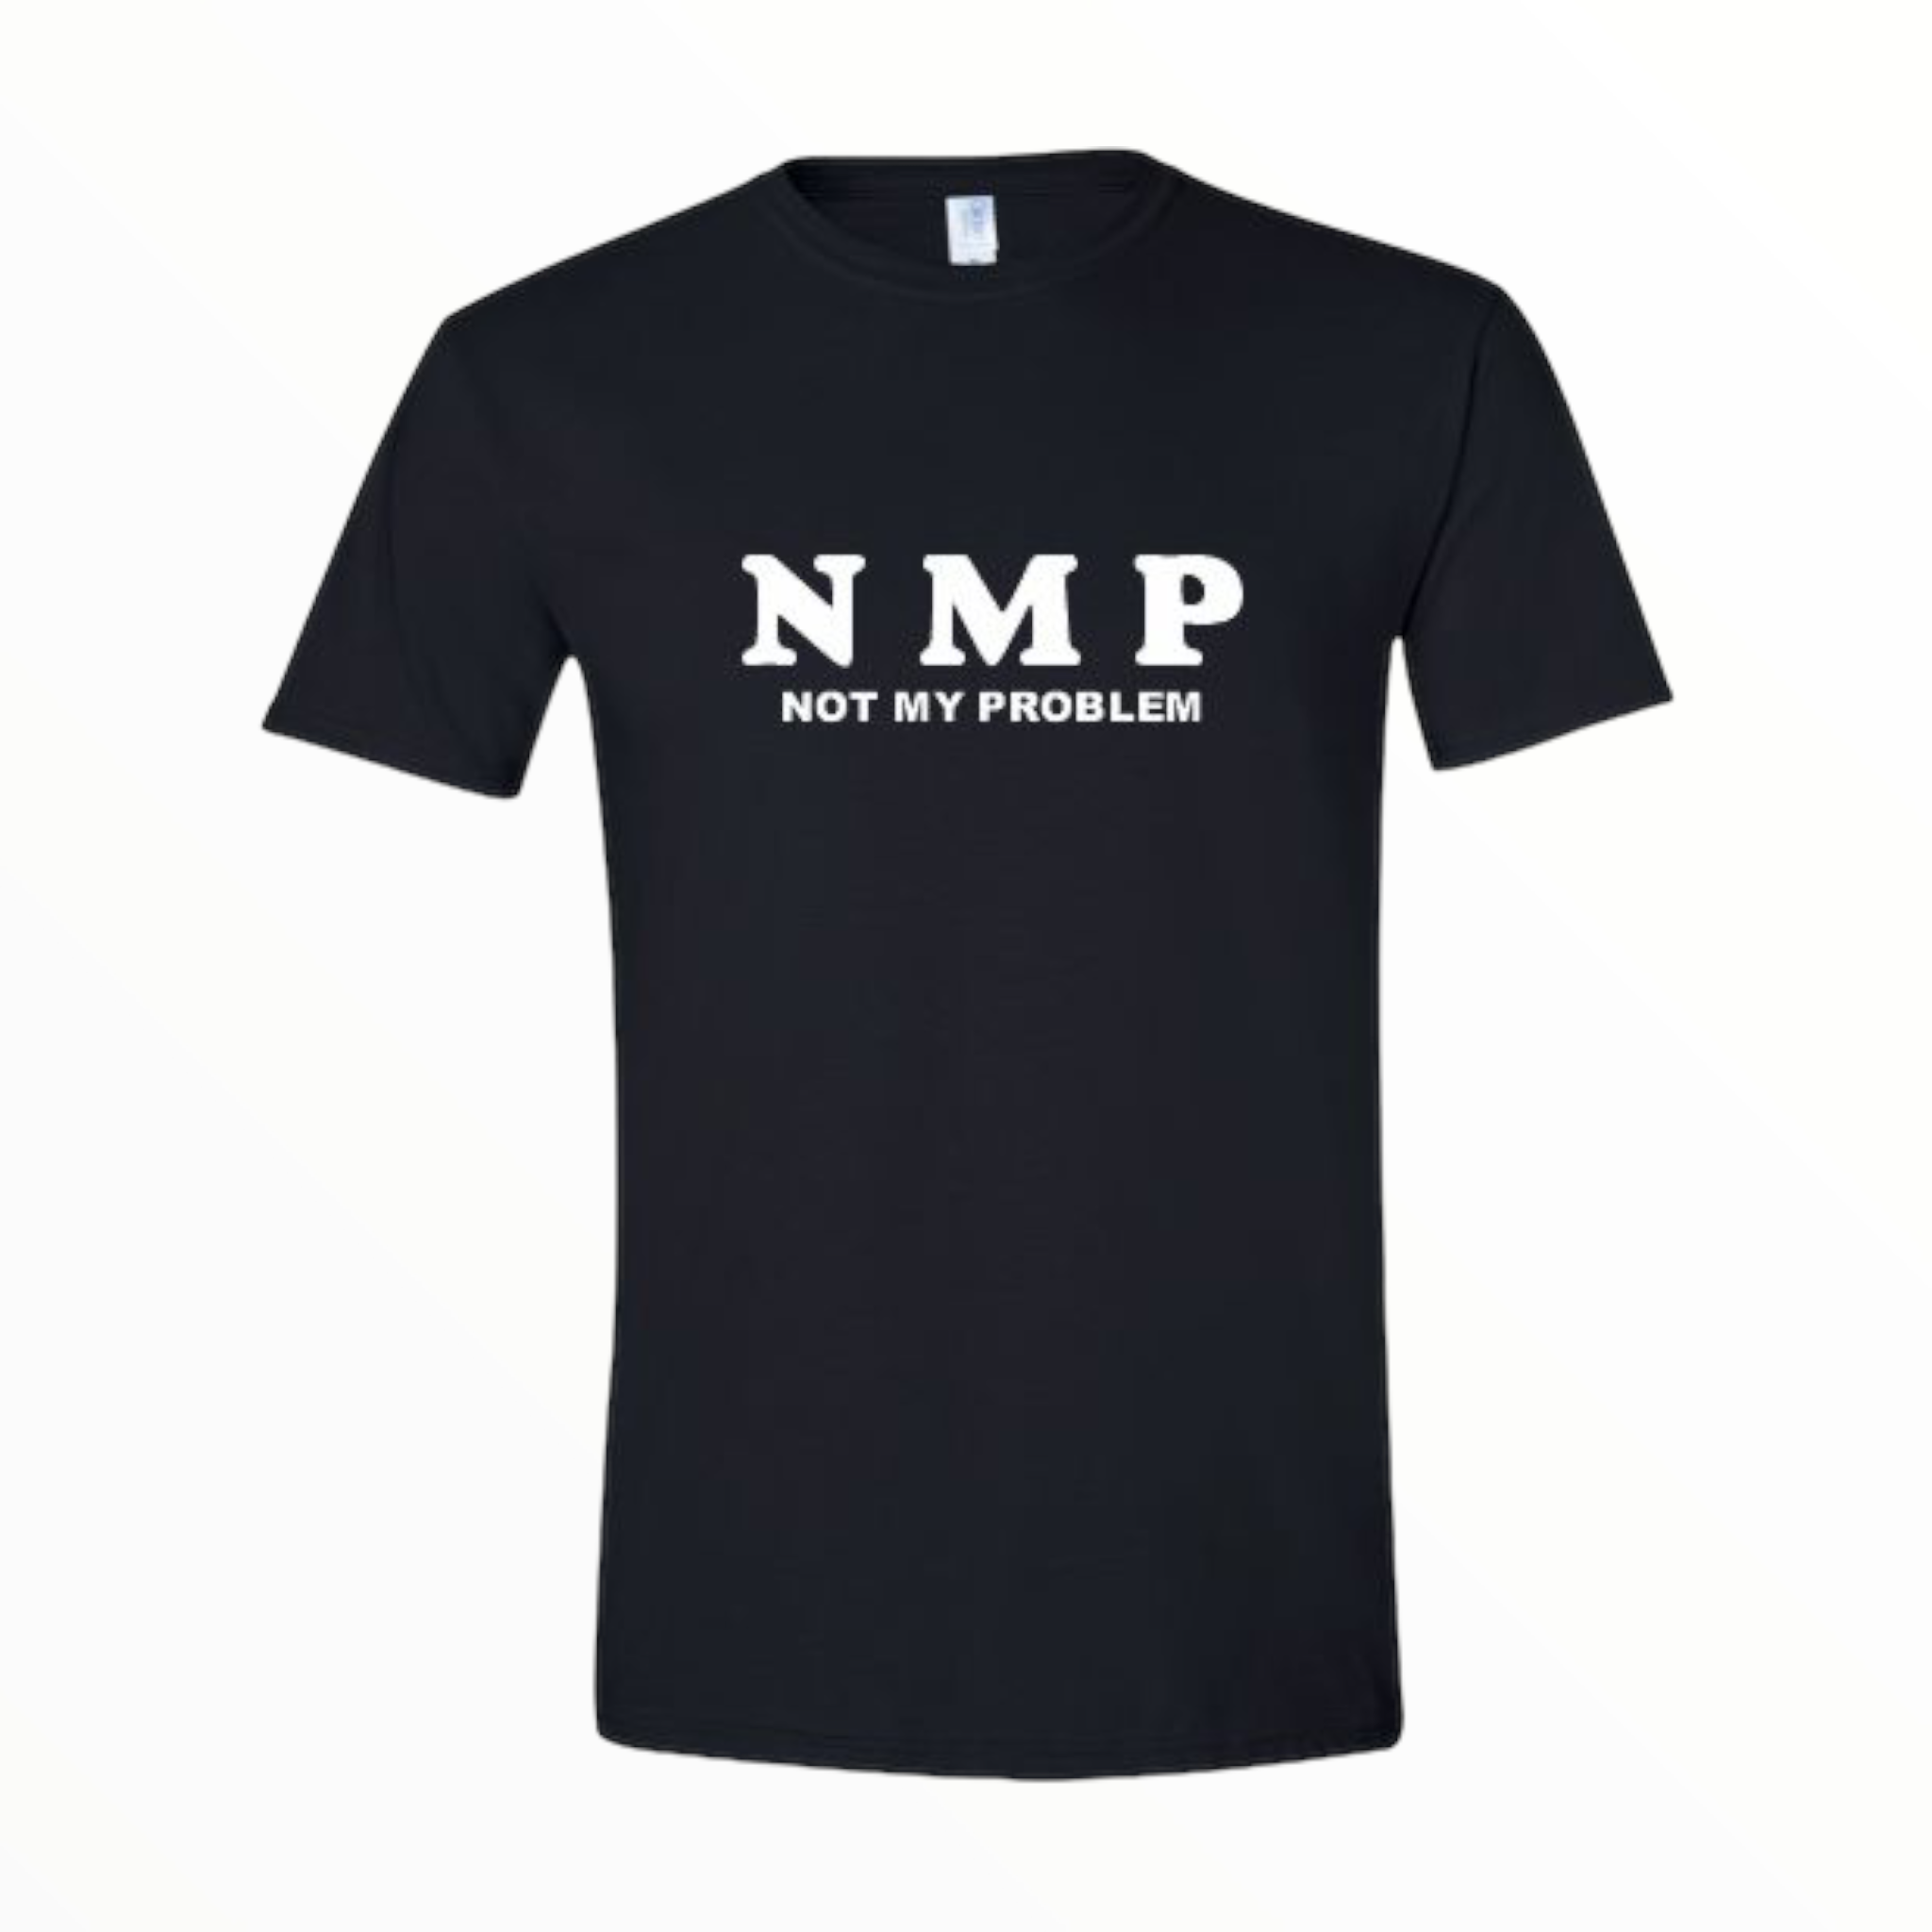 NMP Not My Problem Shirt - Relaxed Attitude Tee